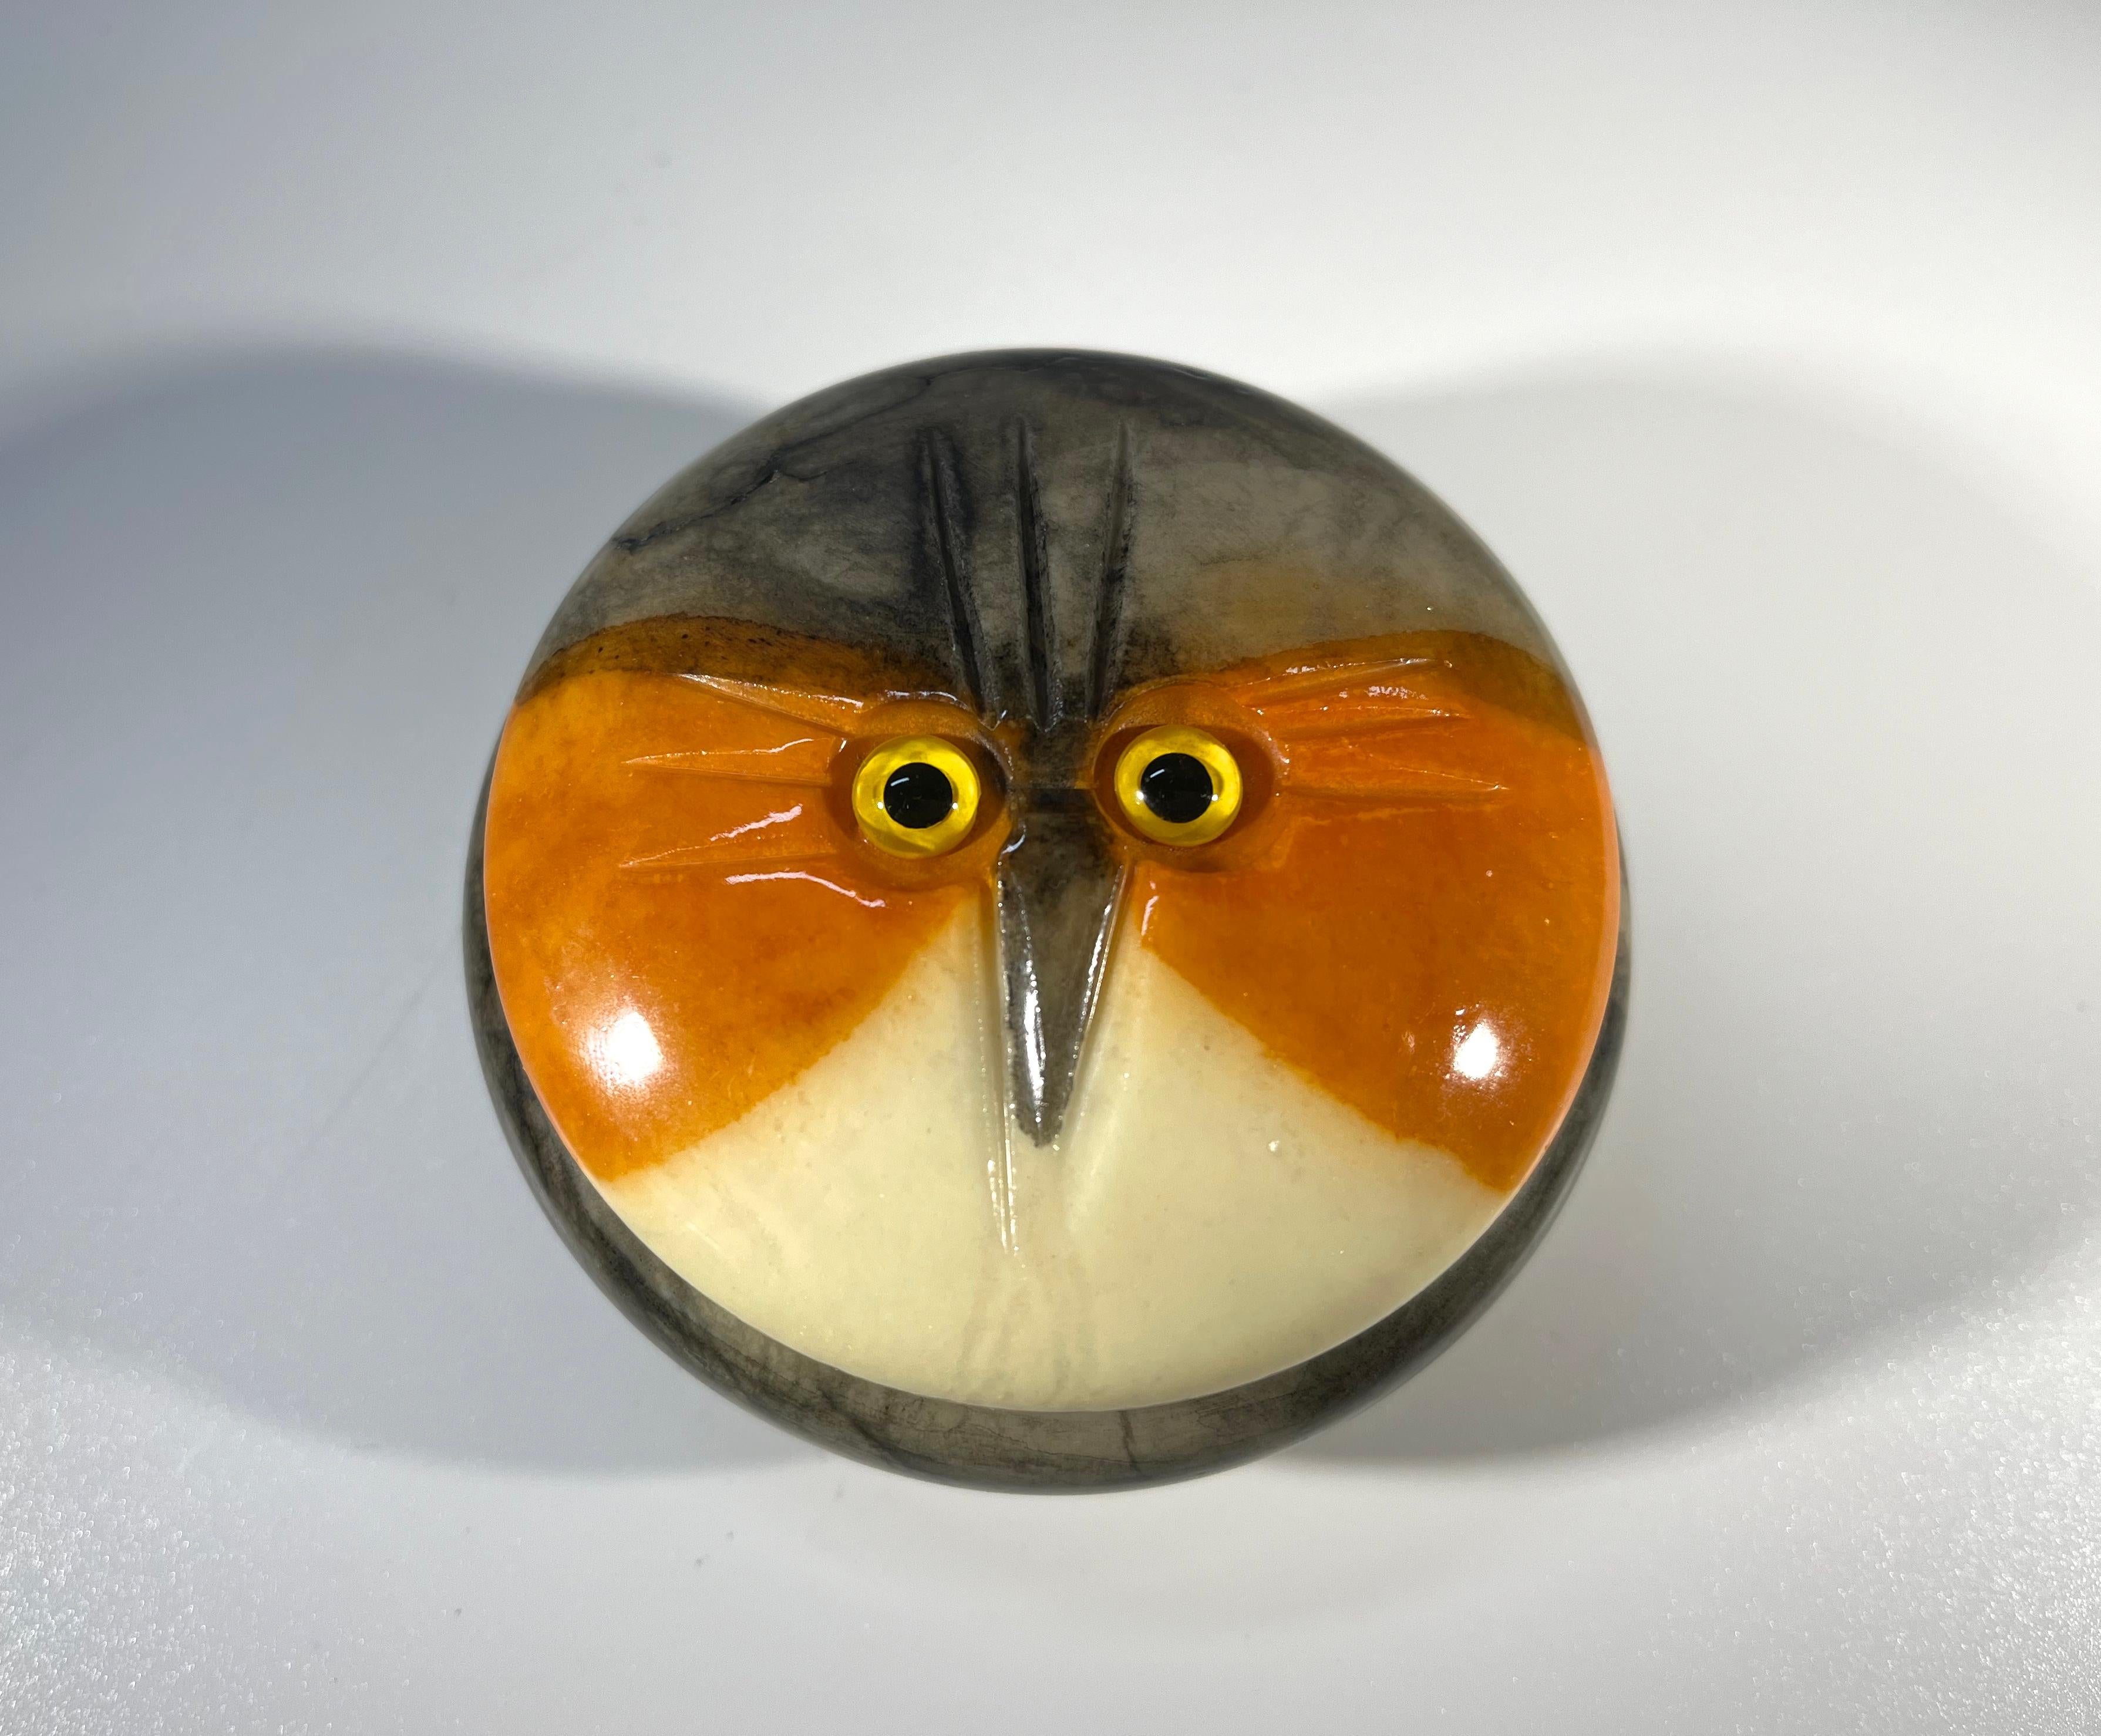 Striking Italian alabaster hand crafted trinket pot of an owl with a fixed gaze
Circa 1970's
Original Italian label to base
Height 1.75 inch, Diameter 3.25 inch
In excellent condition
Wear consistent with age and use